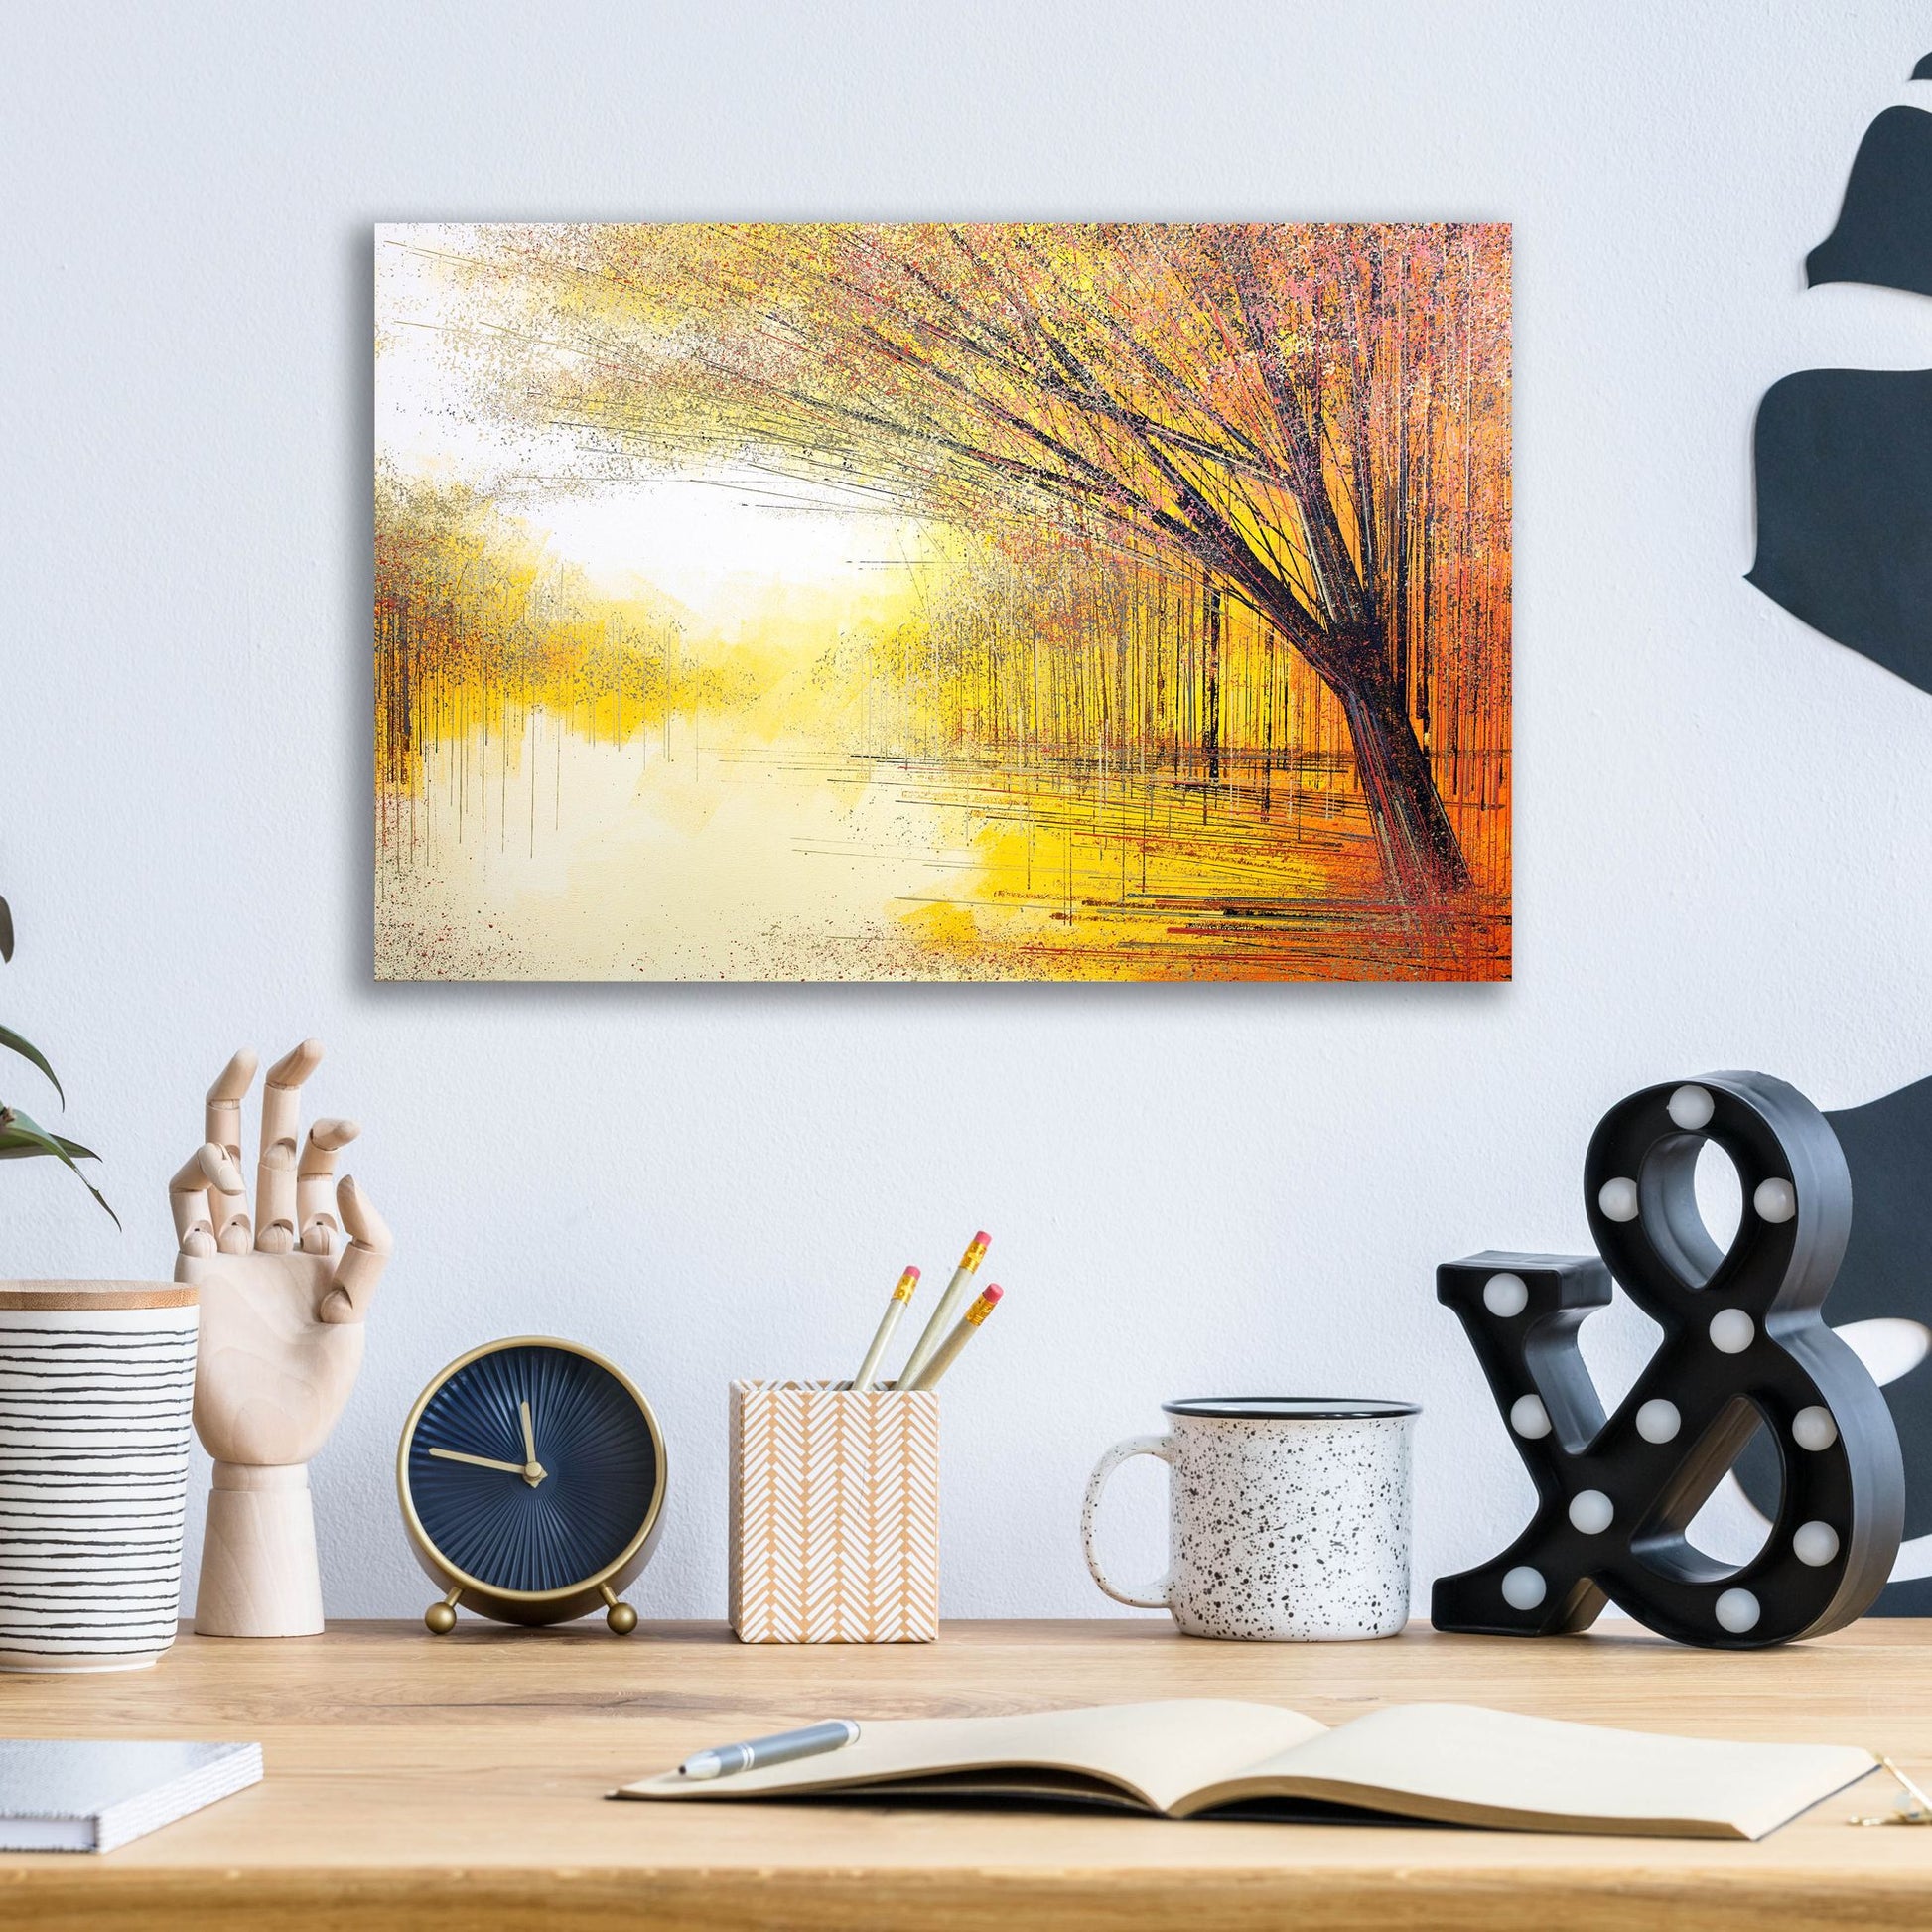 Epic Art 'Trees In A Golden Glow' by Marc Todd, Acrylic Glass Wall Art,16x12